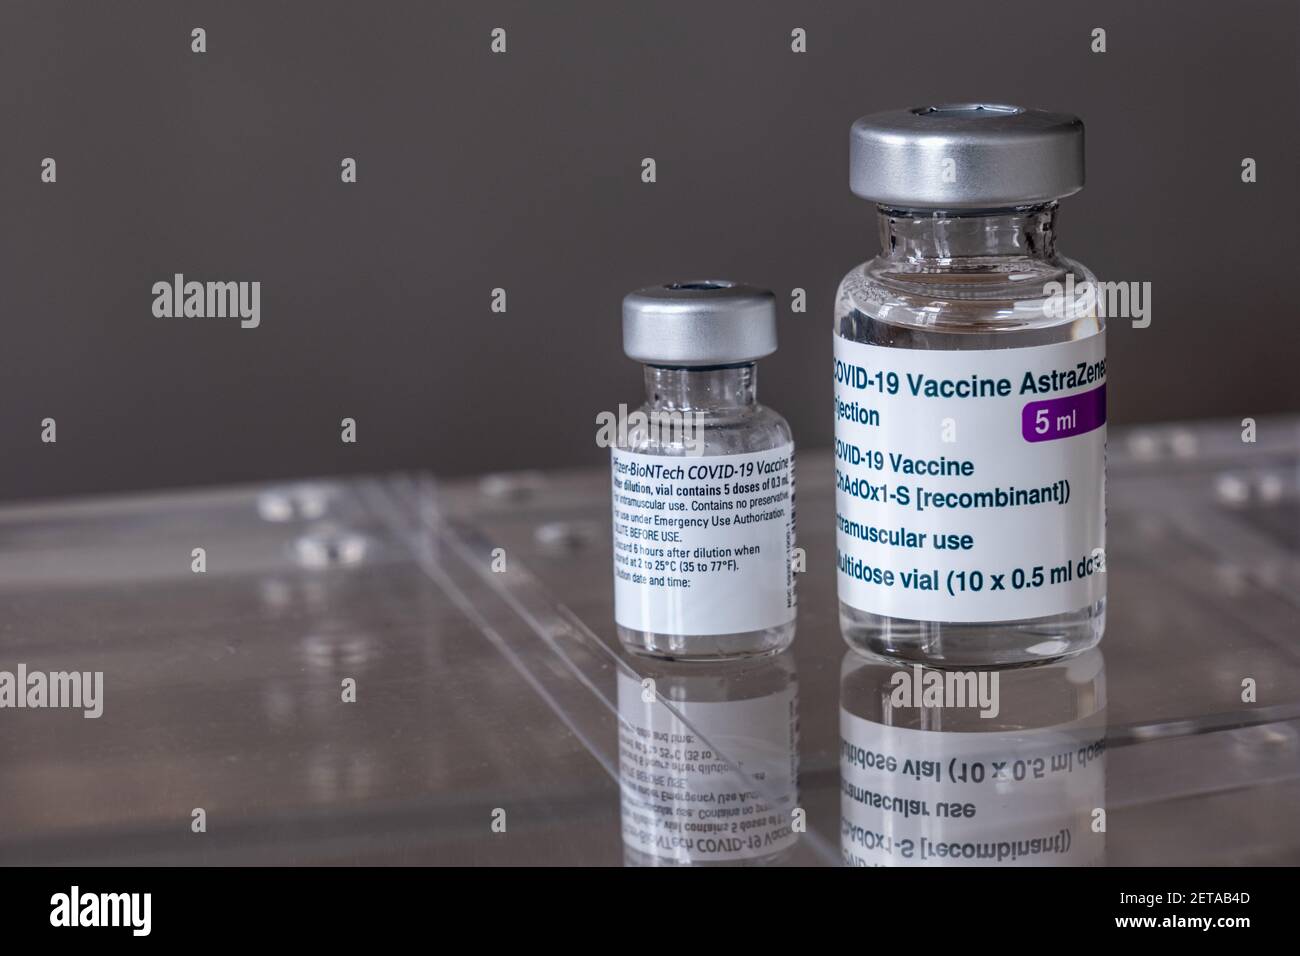 Montreal, CA - 1 March 2021: Vials of Astrazeneca and Pfizer BioNTech Covid-19 vaccines Stock Photo